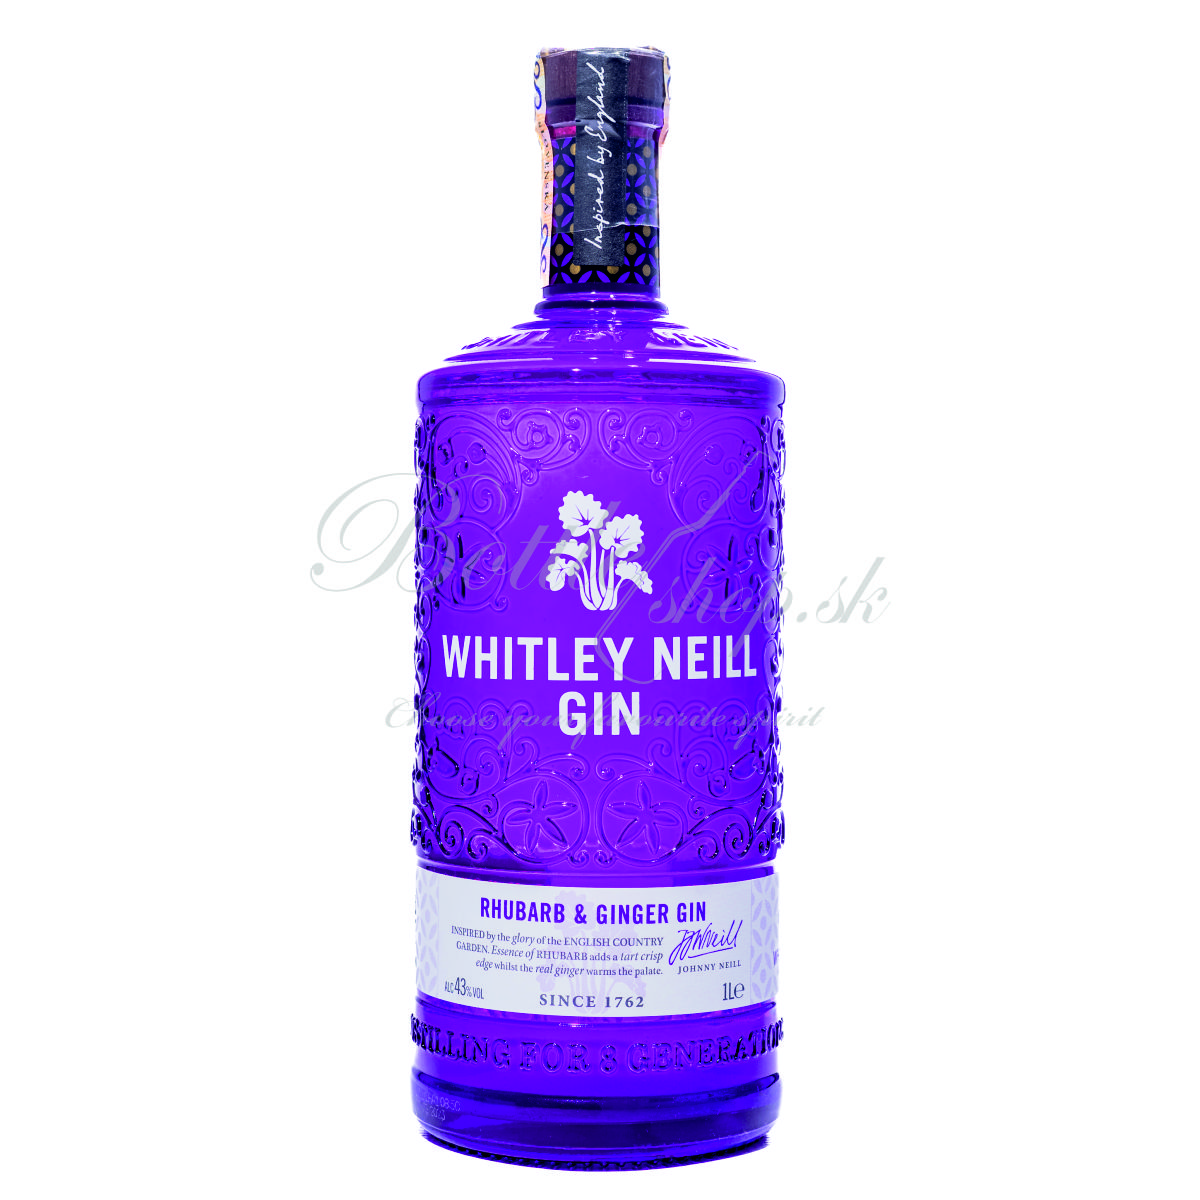 whitley neill rhubarb & ginger gin 1l